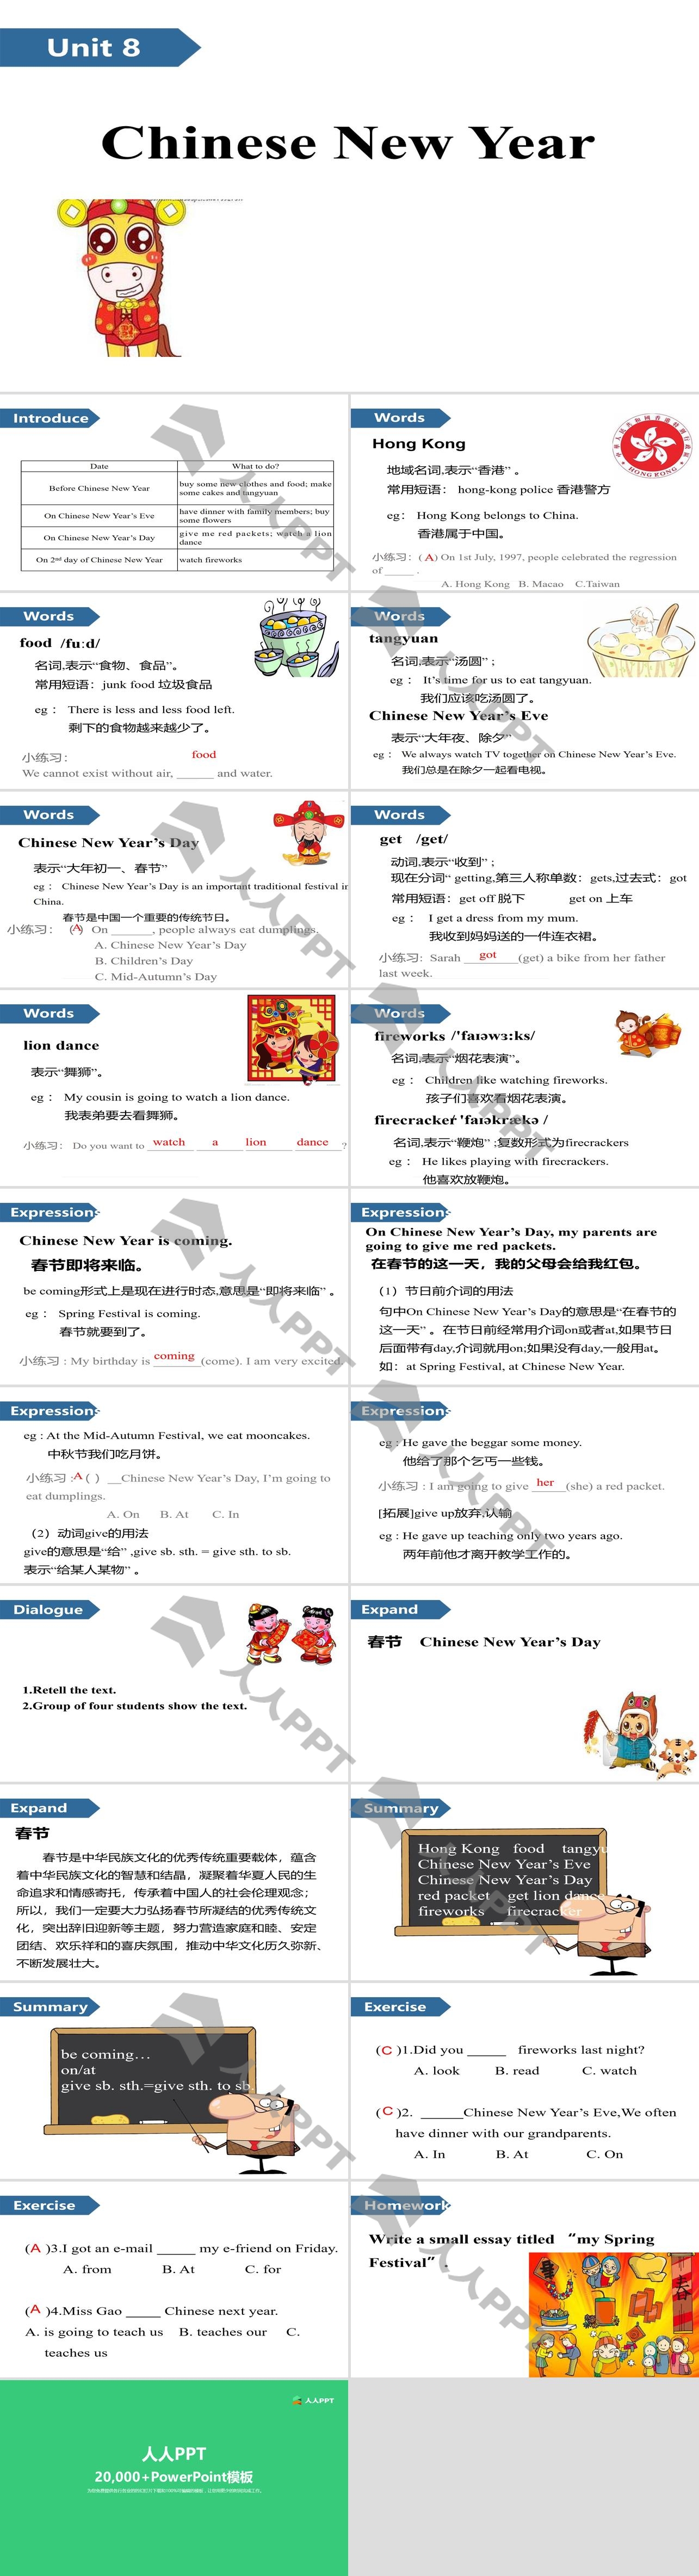 《Chinese New Year》PPT(第一课时)长图